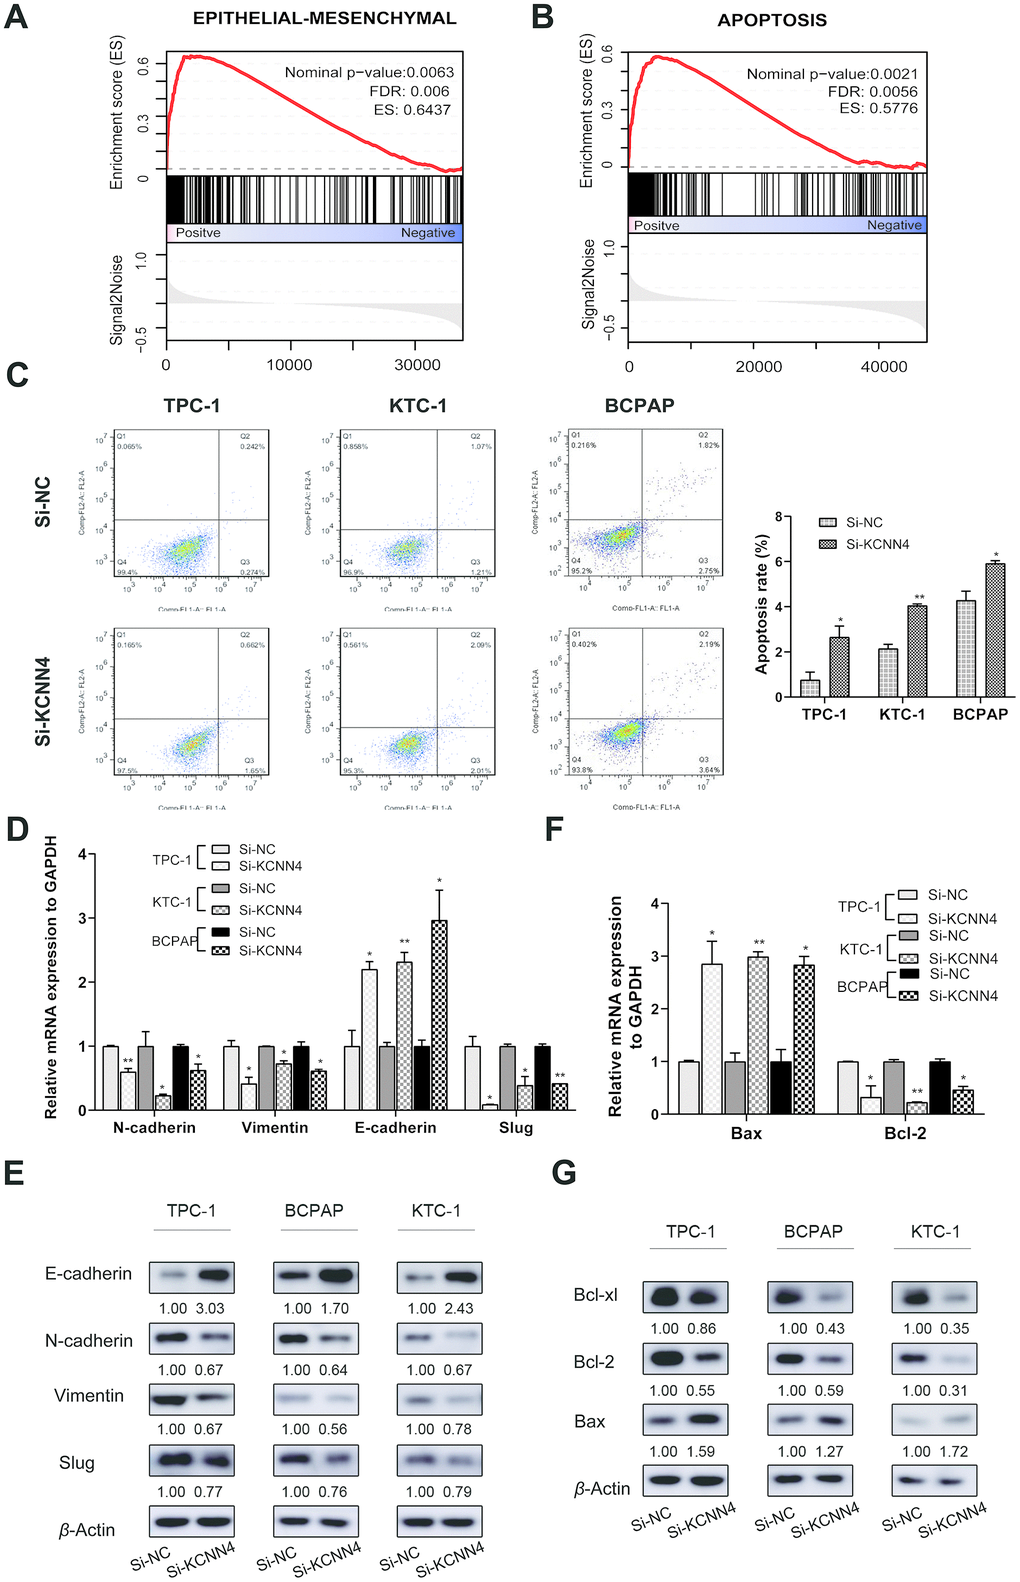 The downregulation of KCNN4 prevented the EMT while promoting apoptosis in PTC cell lines. (A, B) Single GSEA based on data from TCGA demonstrated that KCNN4 was associated with the EMT and apoptosis. (C) Silencing KCNN4 promoted apoptosis in PTC cell lines. (D, E) Silencing KCNN4 upregulated E-cadherin and downregulated N-cadherin, Vimentin and Slug at the mRNA and protein levels. (F) qRT-PCR demonstrated that downregulating KCNN4 enhanced Bax expression but reduced Bcl-2 expression. (G) Western blotting assays revealed that downregulating KCNN4 increased Bax expression and reduced Bcl-2 and Bcl-xl expression at the protein level. *pp